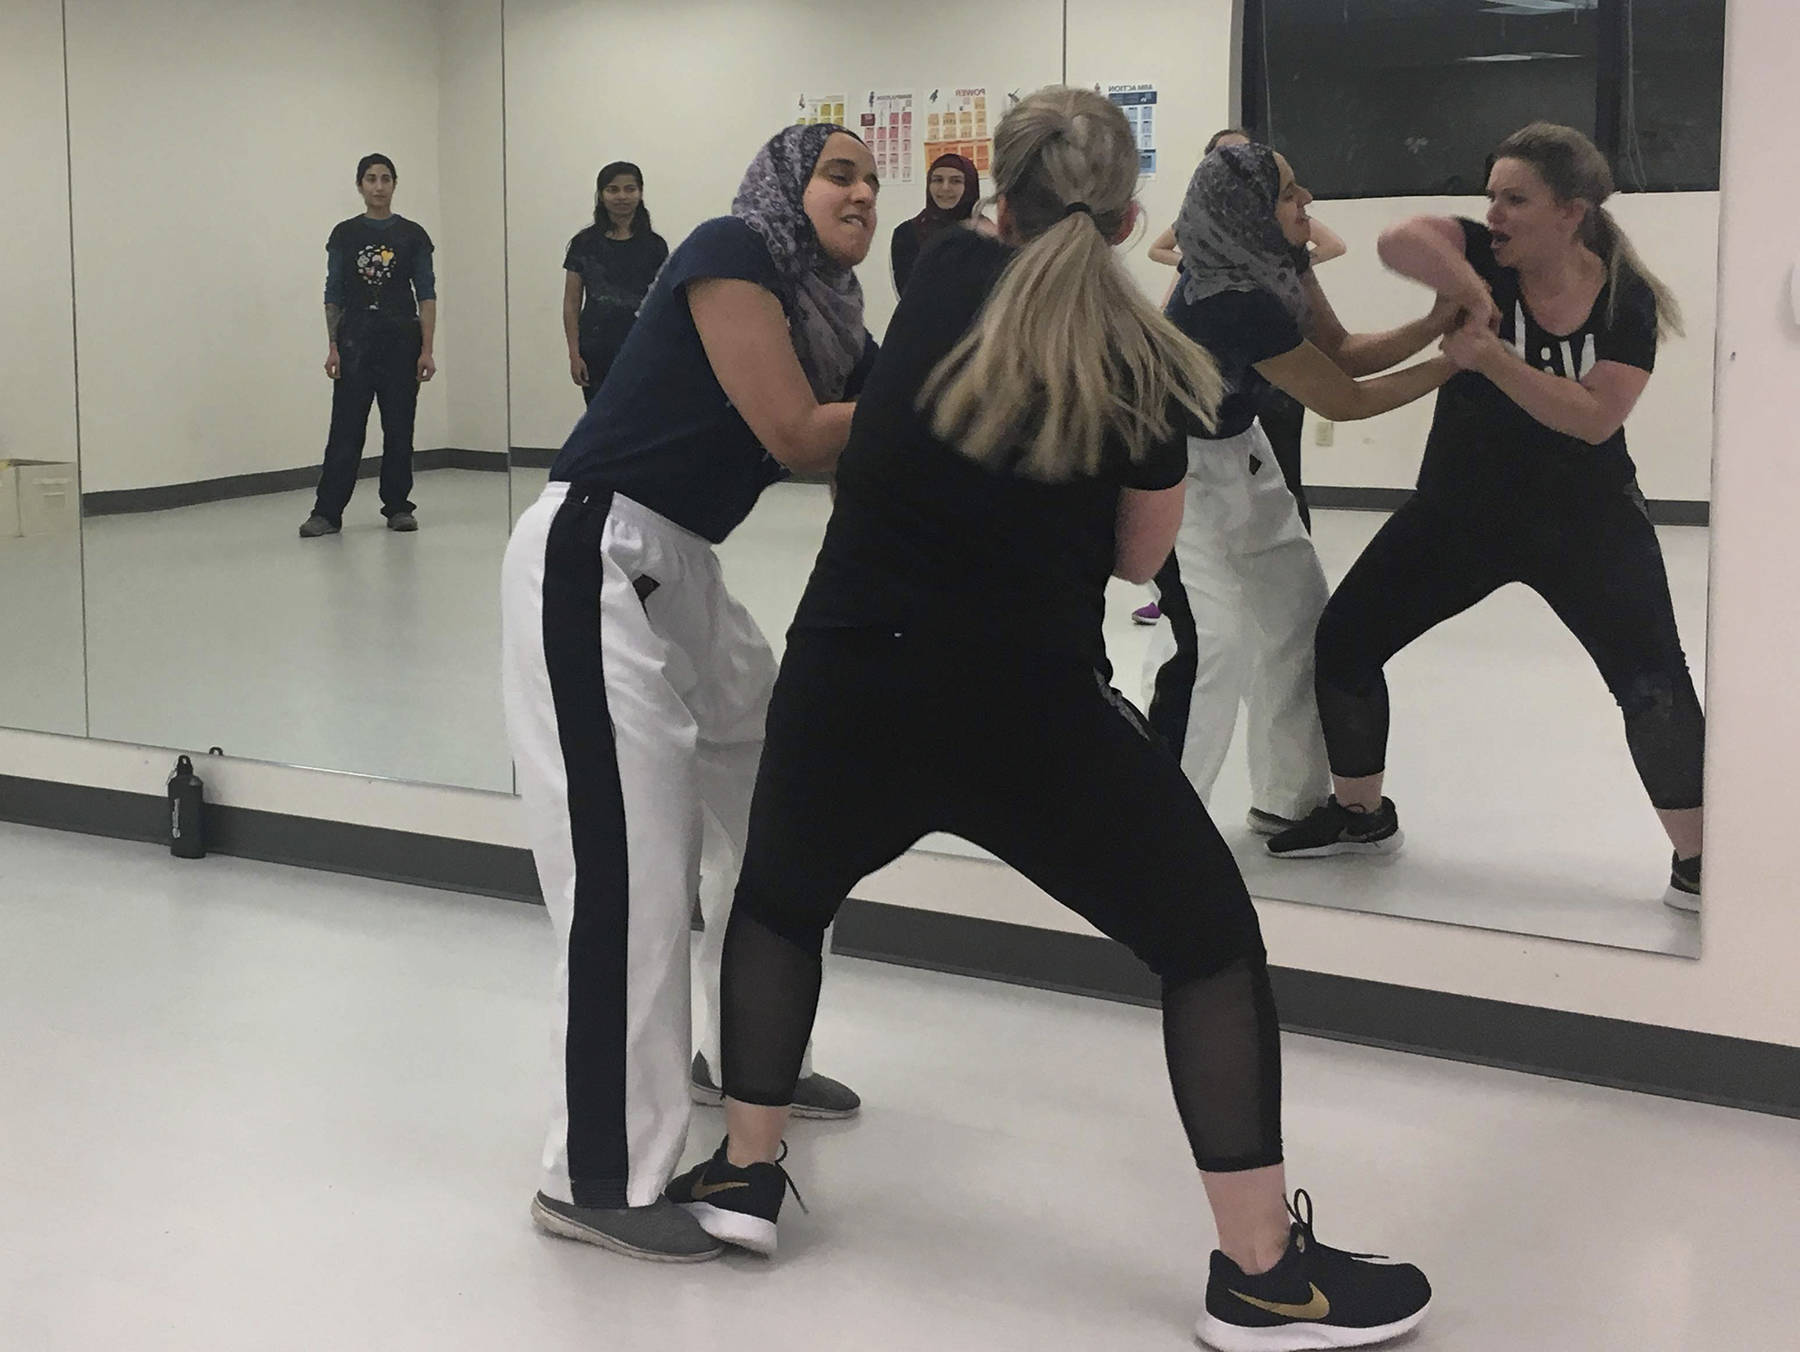 ‘Defense Ninjas’ instructor Fauzia Lala and COO Kate Warady demonstrate how to break a wrist grab in a workout room at Redmond’s DaVinci Academy on Jan. 15. Katie Metzger/staff photo